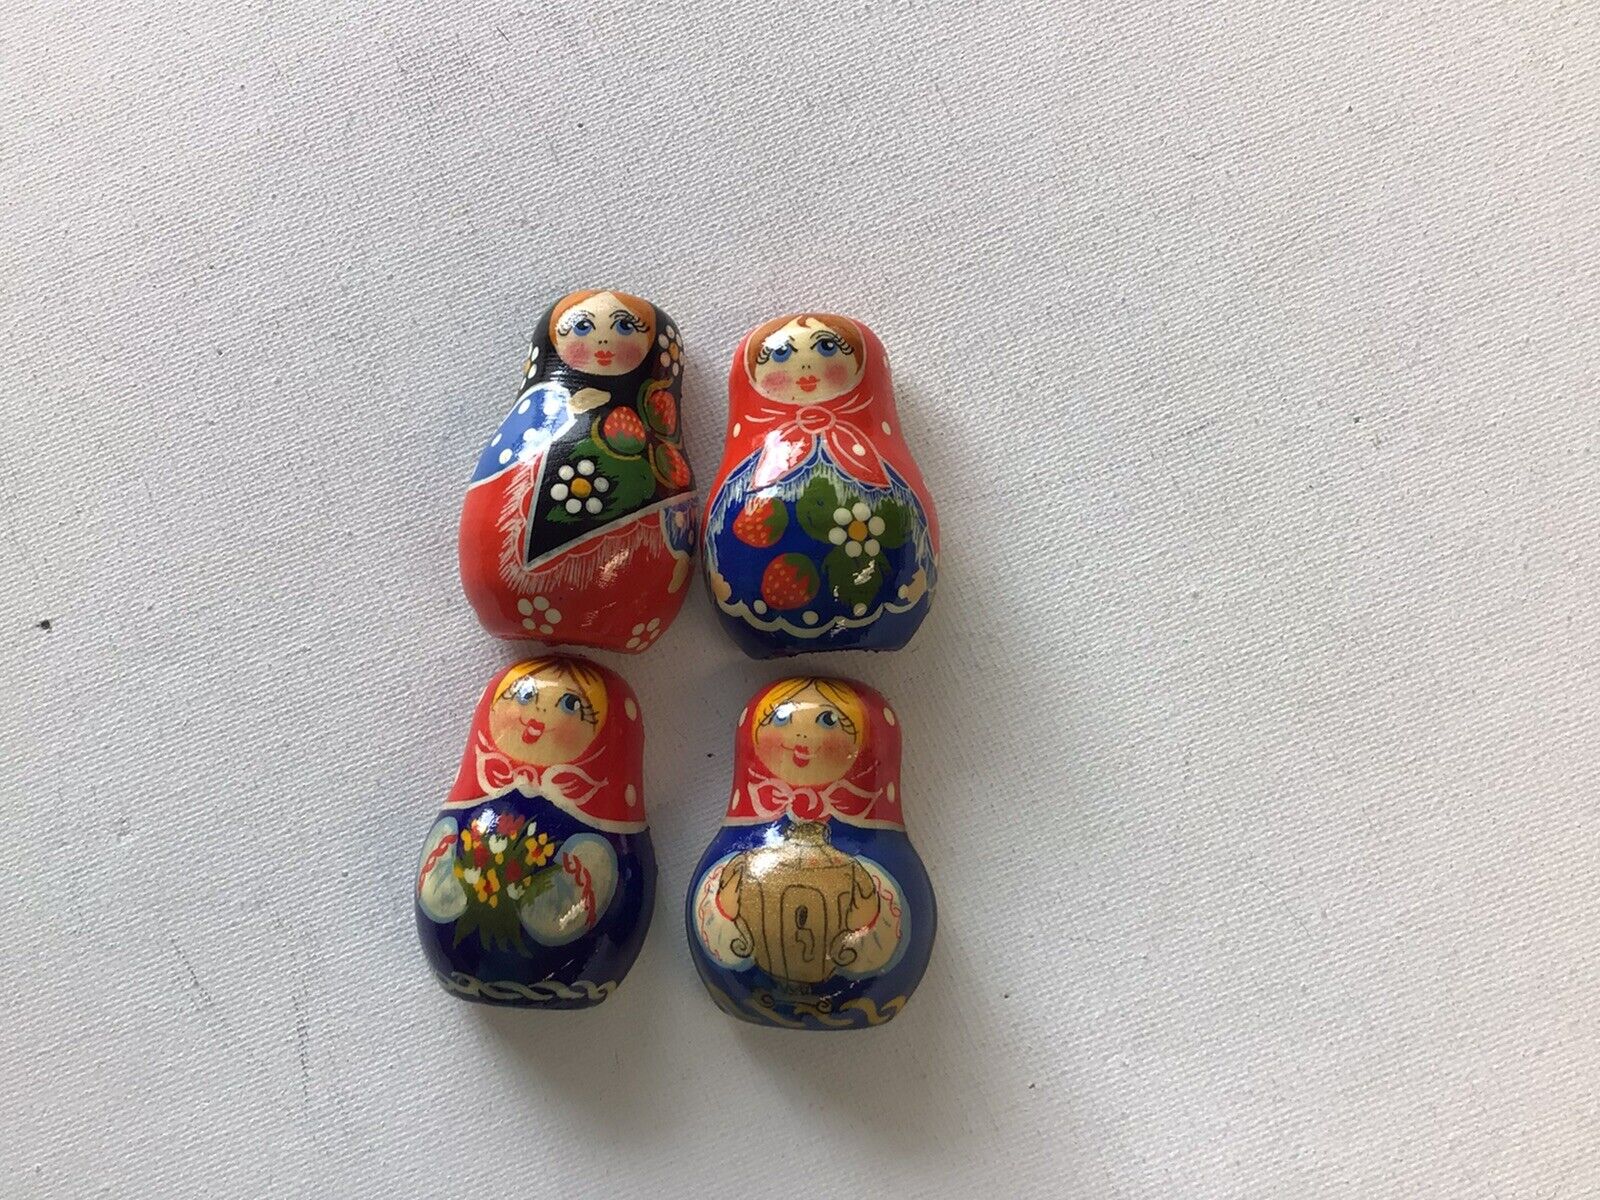 Lot of 4 Vintage Wooden Magnet Matryoshka Doll for Refrigerator from Russia 